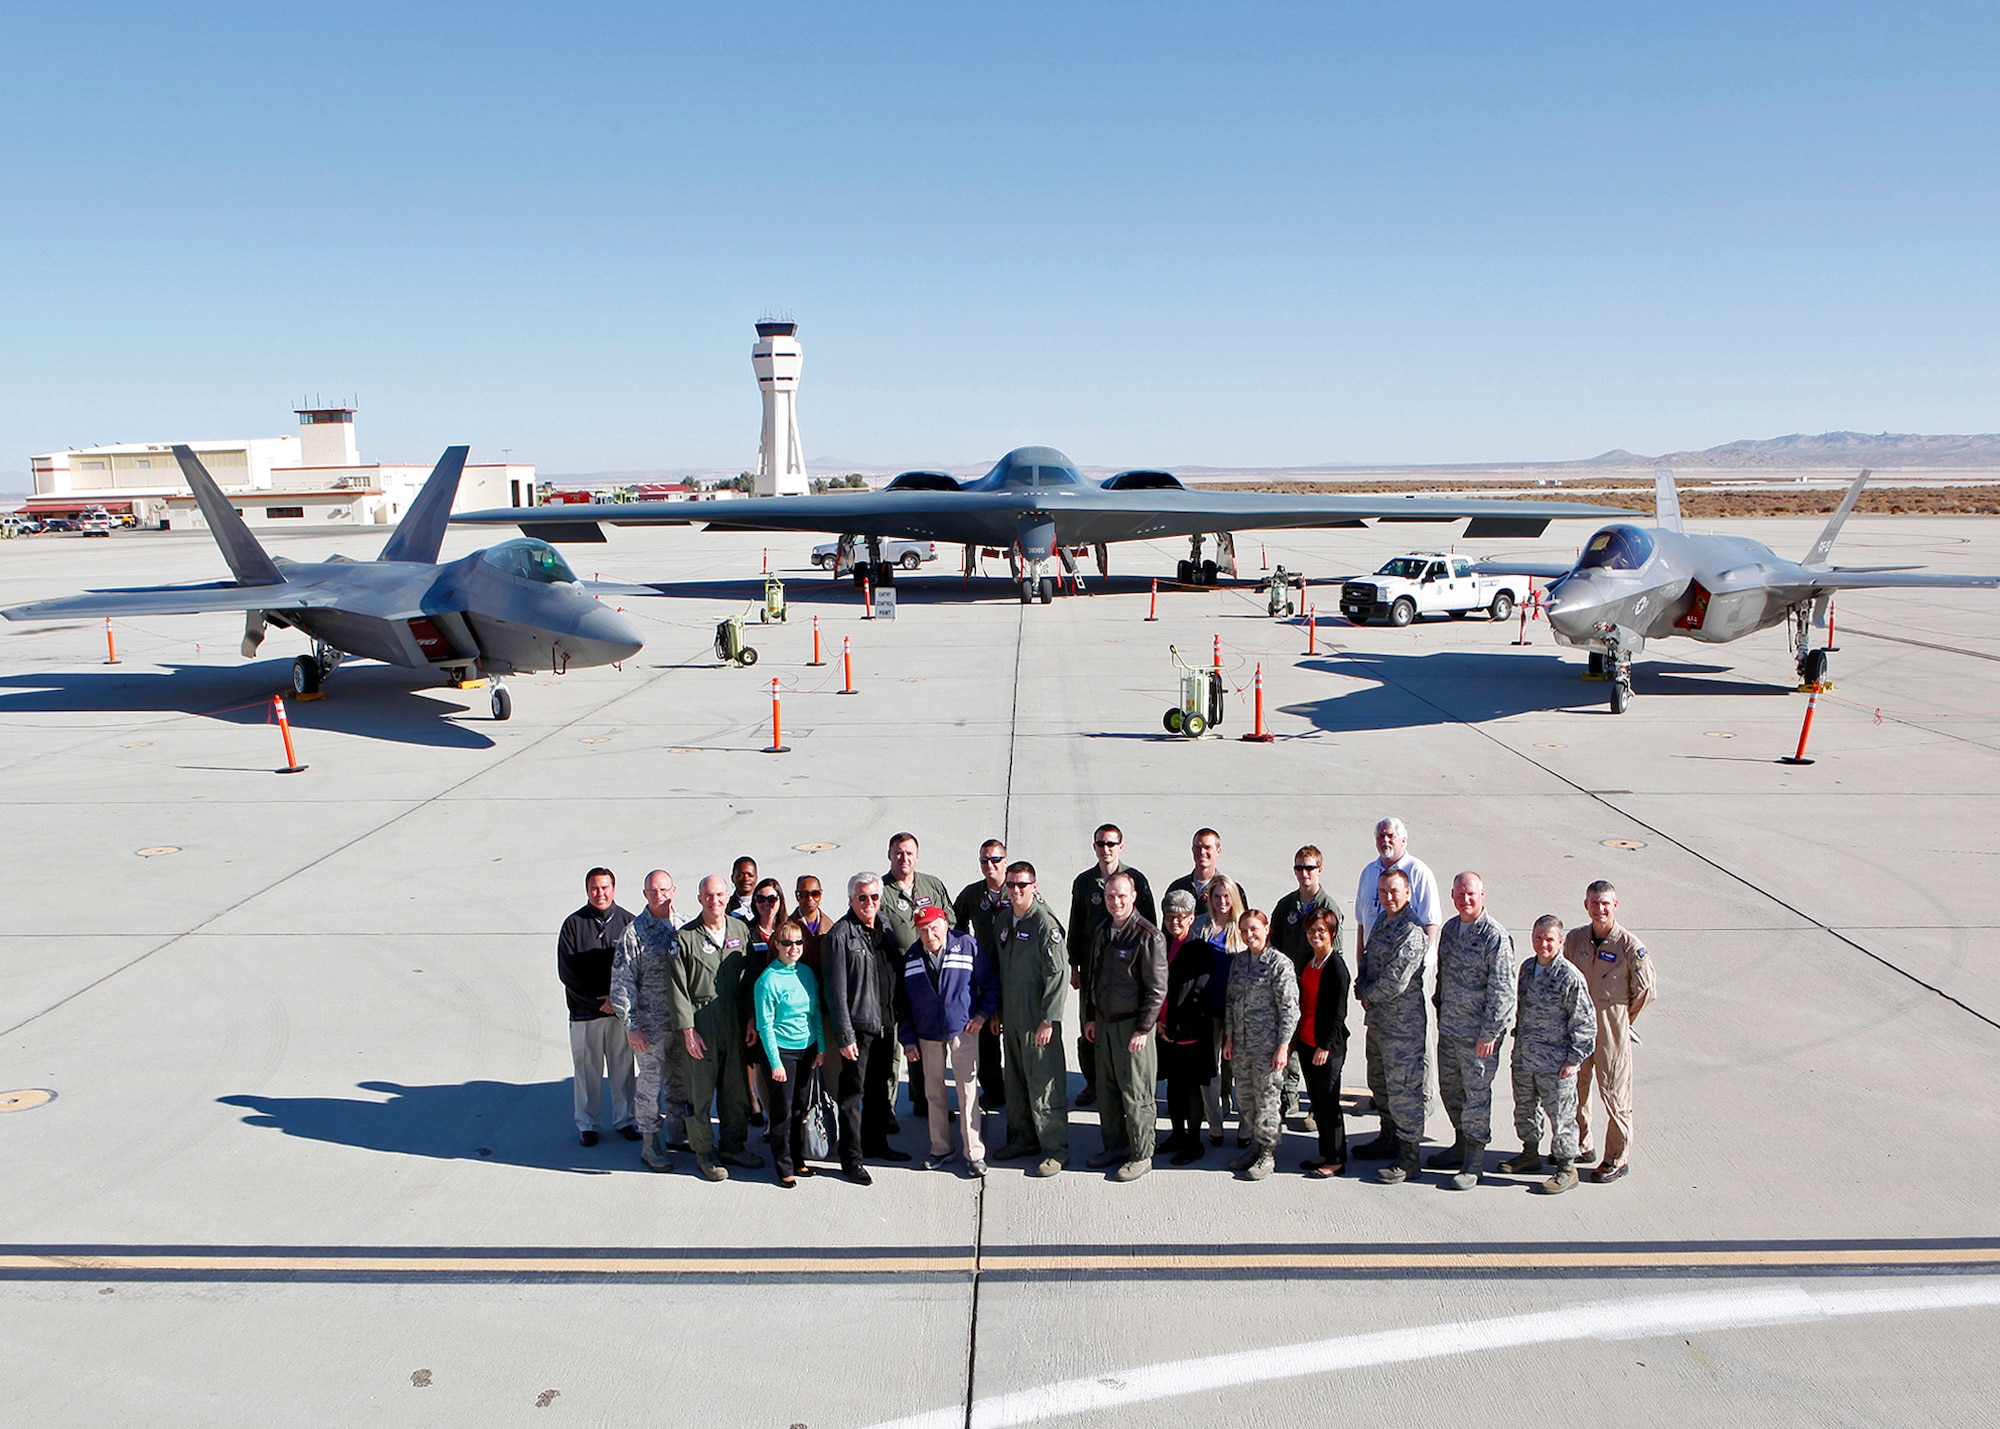 Members of Team Edwards got to pose for a photo with Louis Zamperini in front of a B-2 Spirit, an F-22 Raptor and an F-35 Lightning II Joint Strike Fighter Dec. 10. Afterwards, Zamperini spoke at the Base Theater for a training event on resiliency during Wingman Day. (U.S. Air Force photo by Jet Fabara)